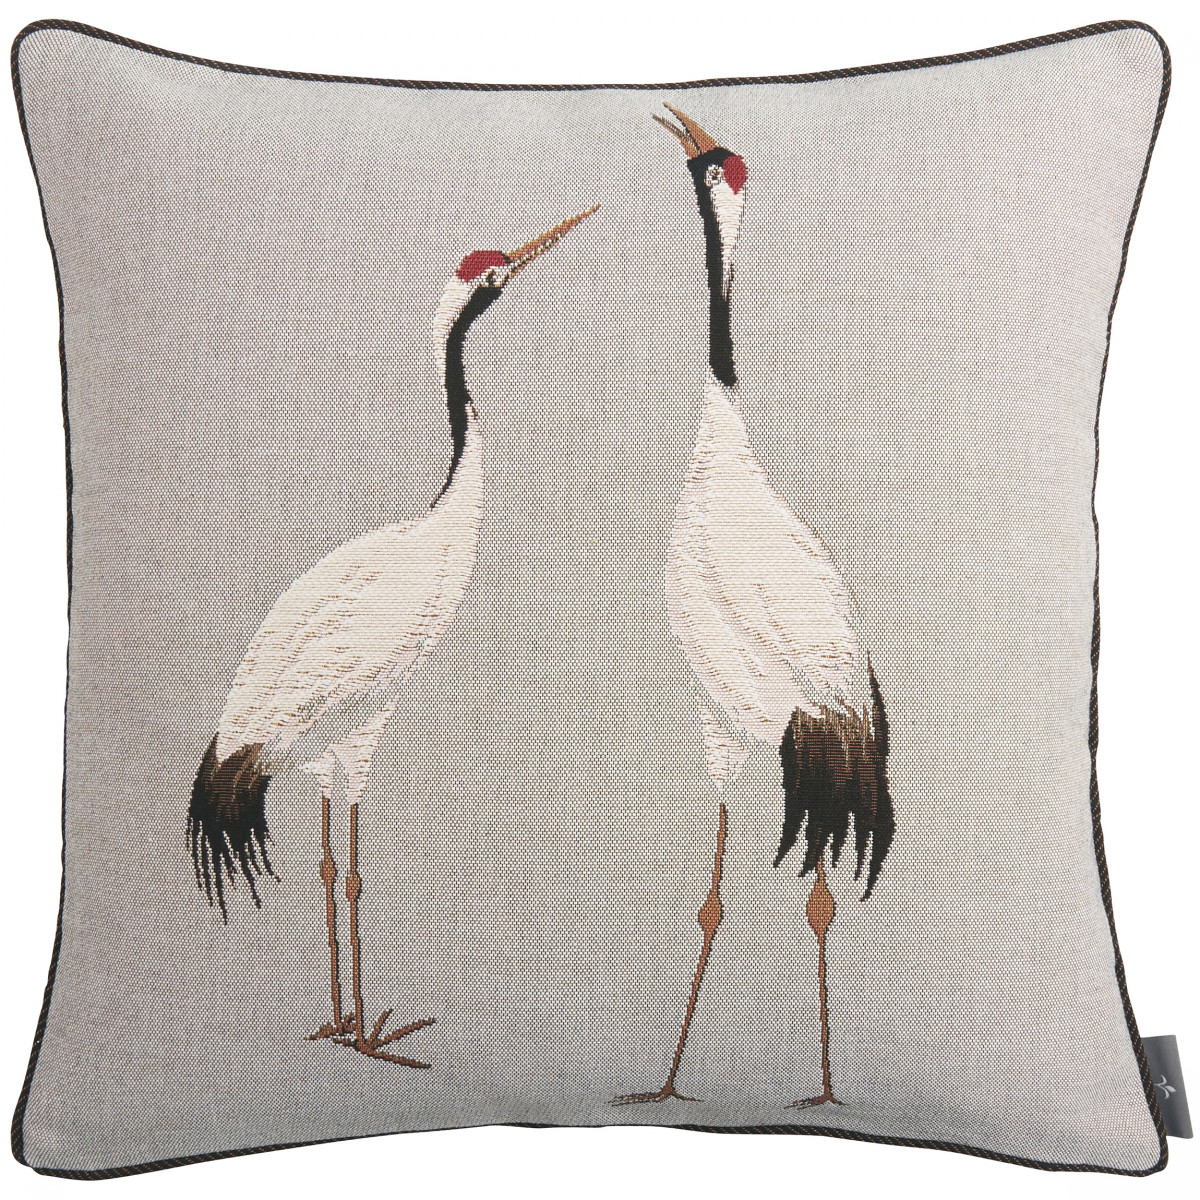 Coussin tapisserie deux grues blanches made in france gris   48x48